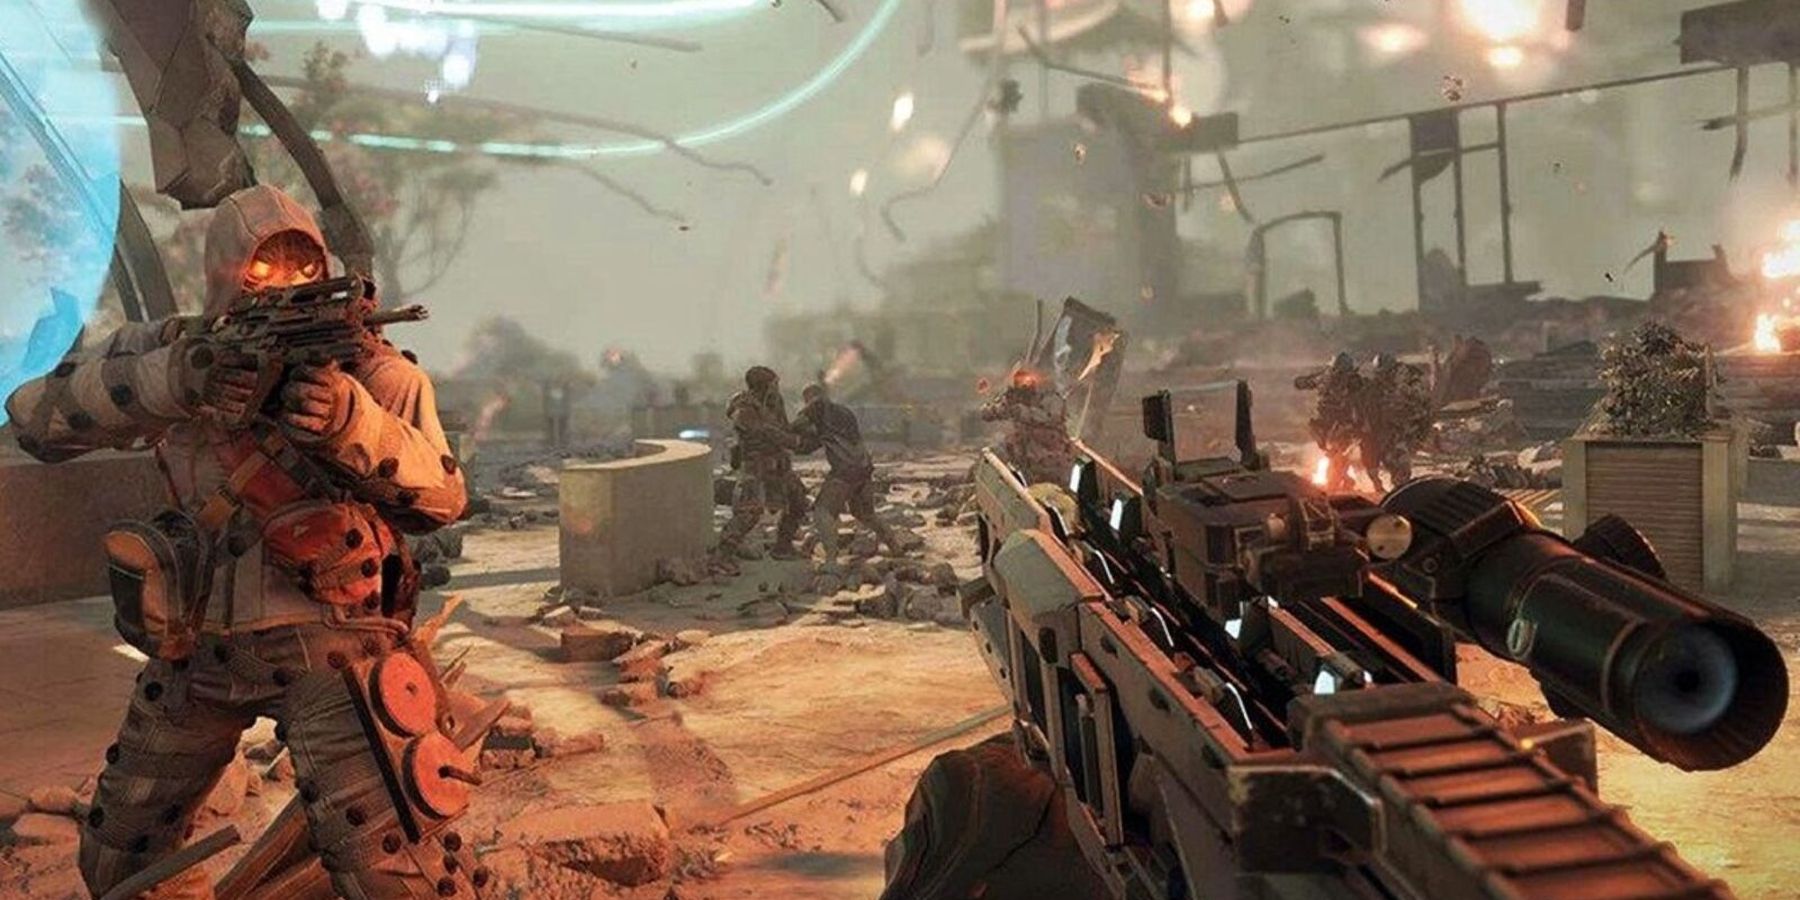 Killzone Games No Longer Support Online Multiplayer Features